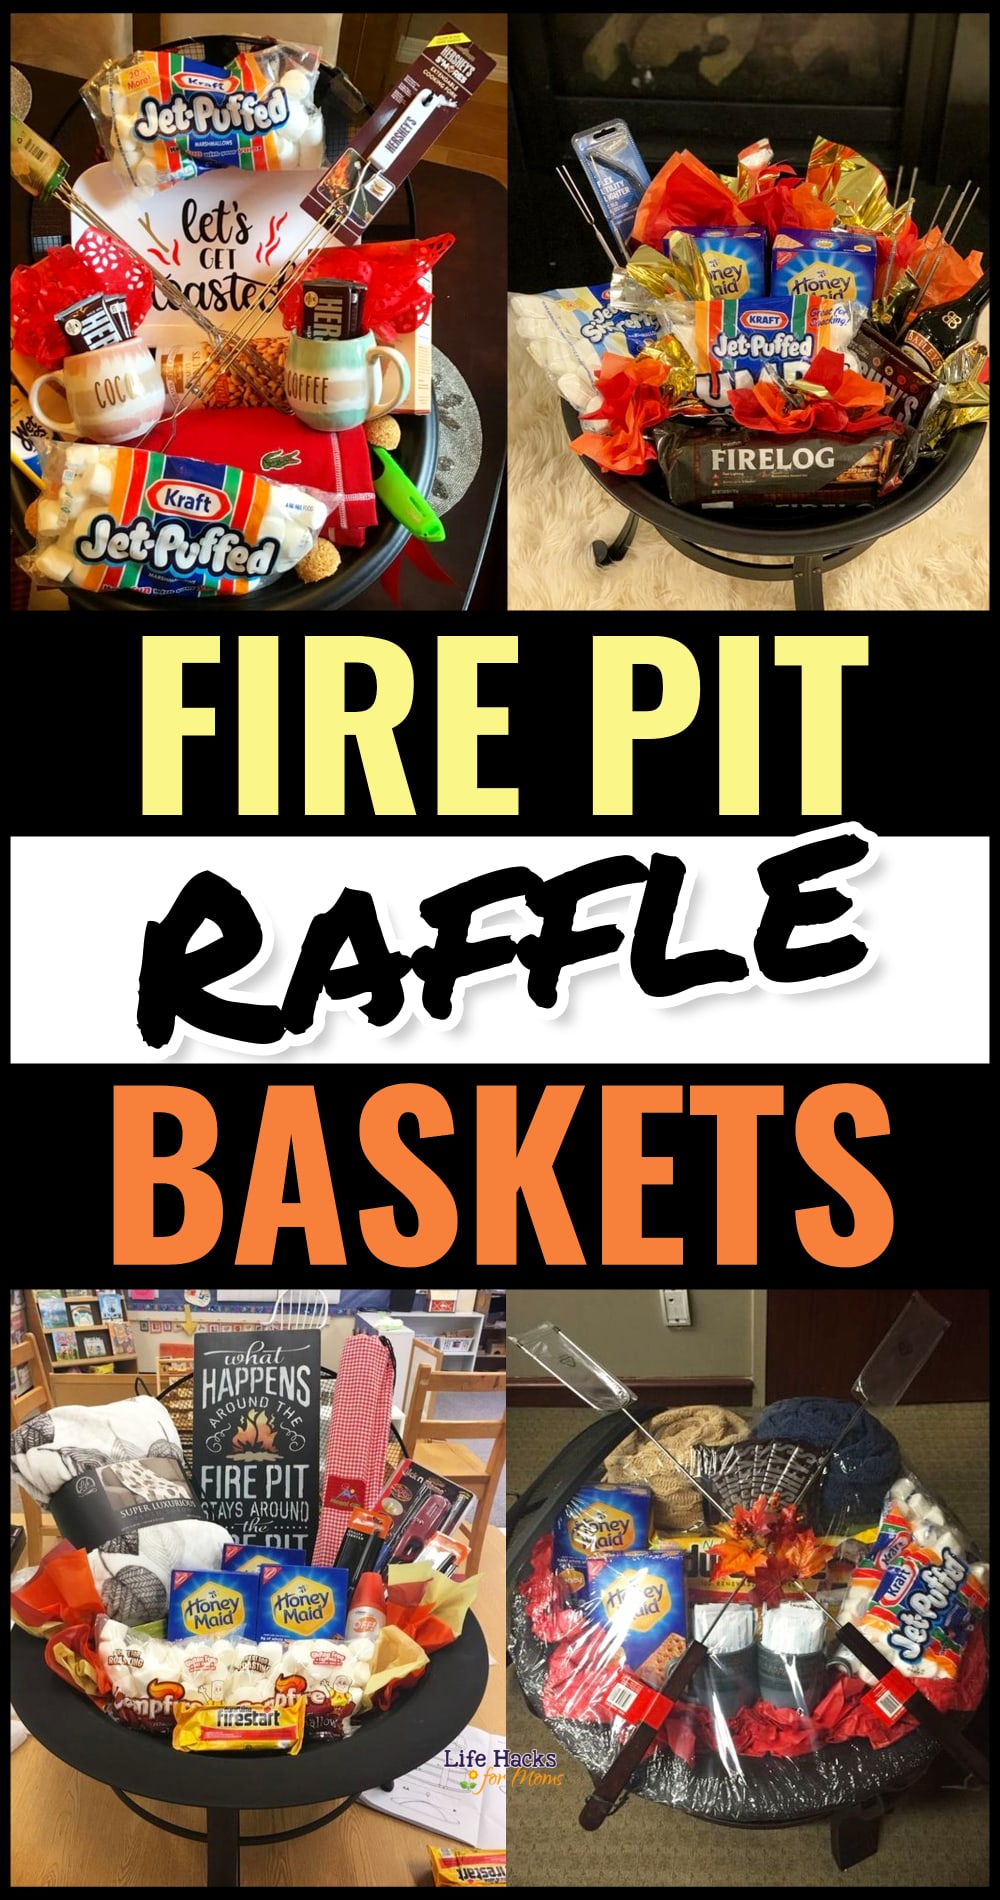 Fire pit raffle basket ideas as a GOOD raffle prize ideas for company party employees at work